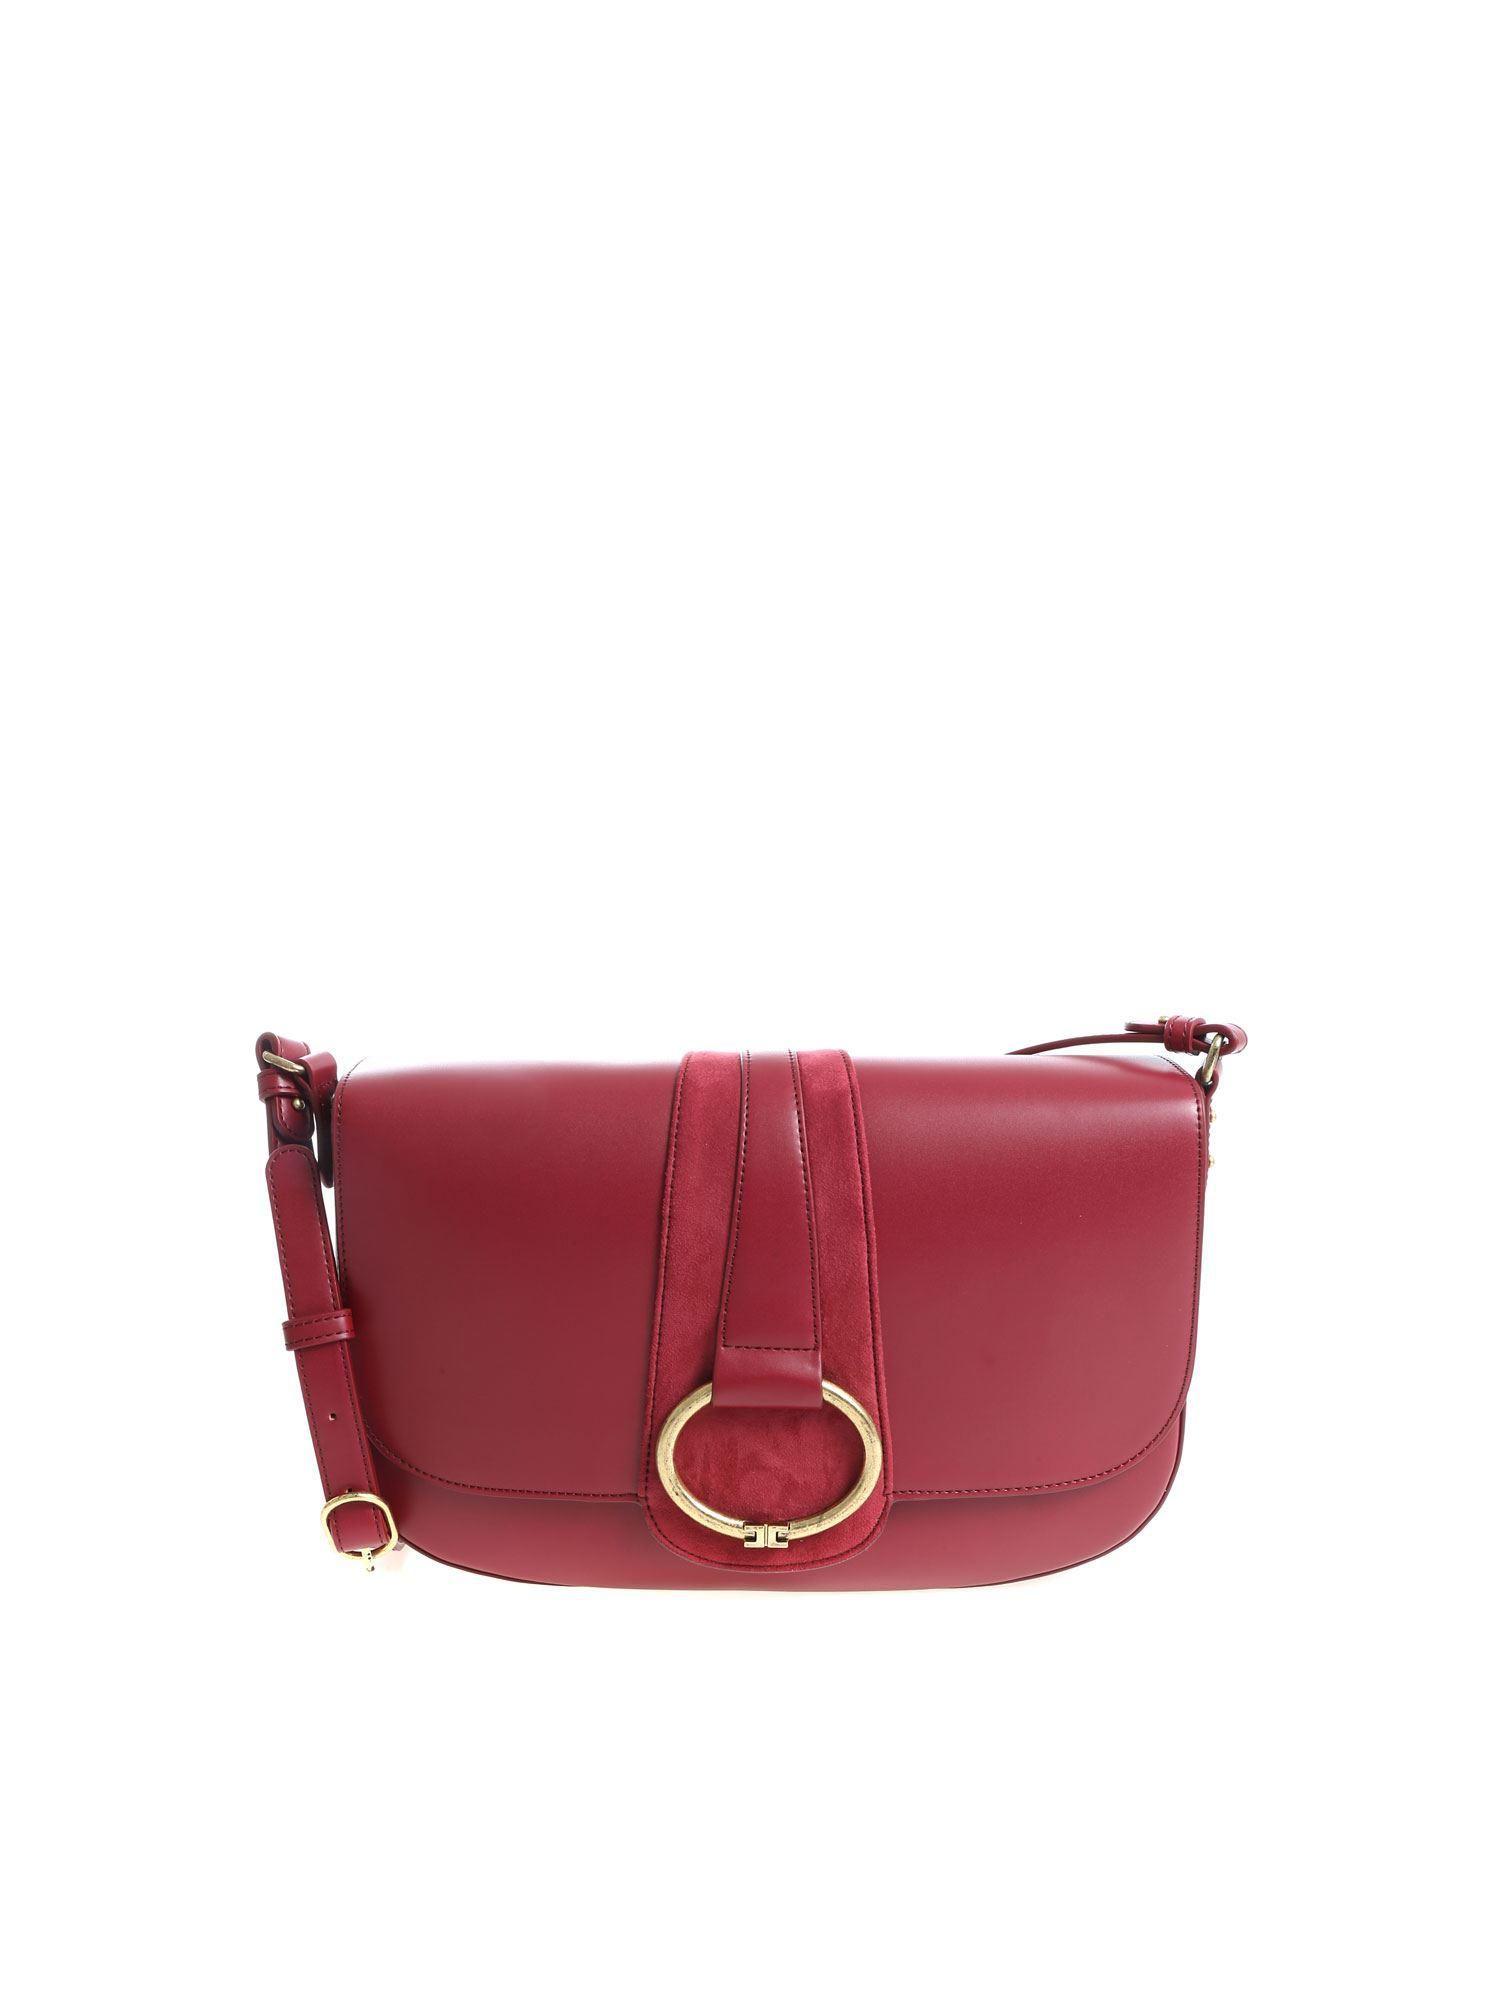 Wine Colored Logo - Lyst Franchi Wine Red Colored Shoulder Bag With Logo